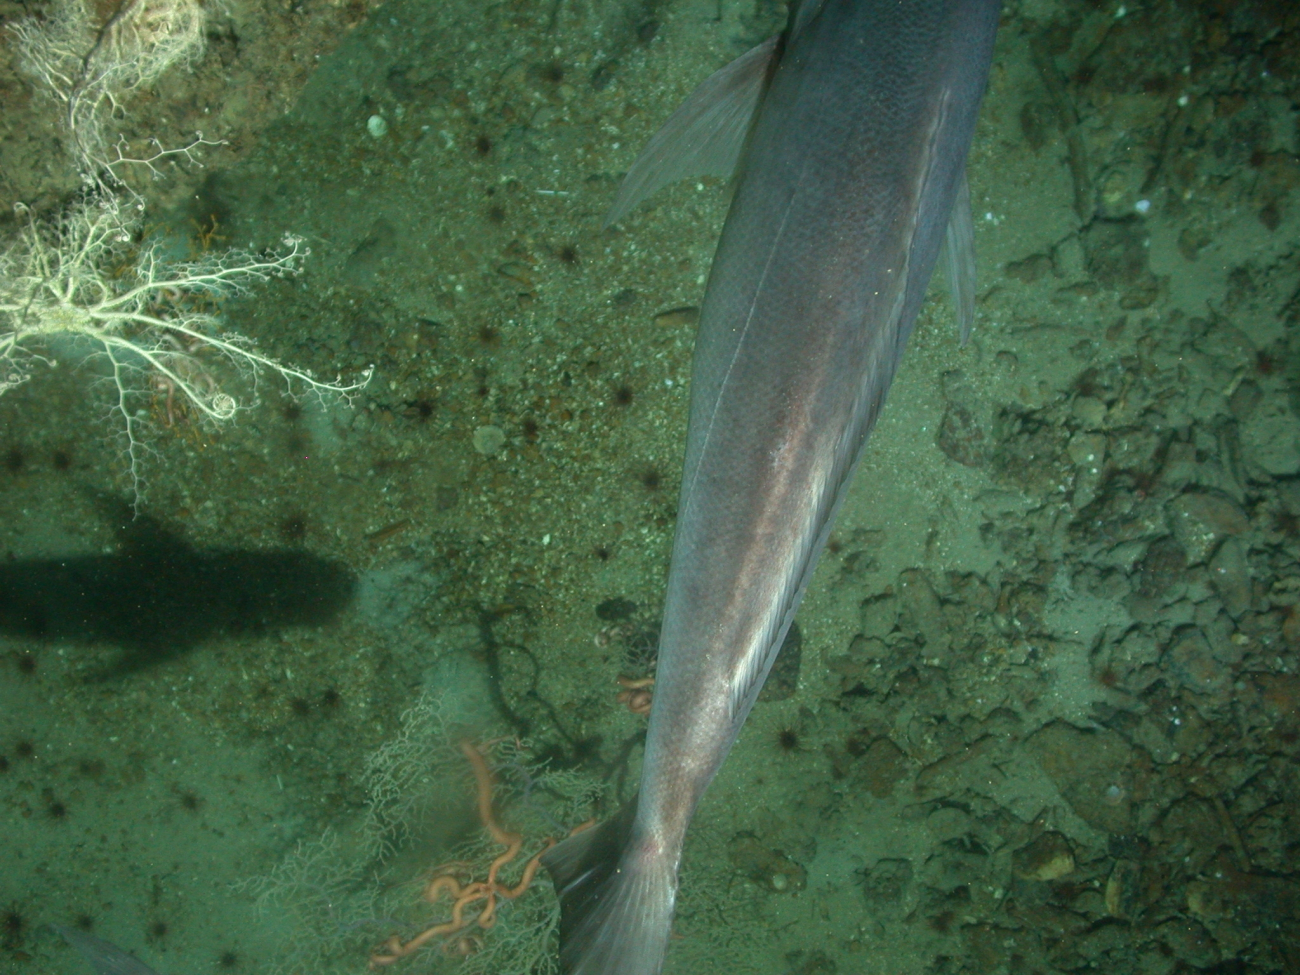 Tail of a large fish passing beneath camera